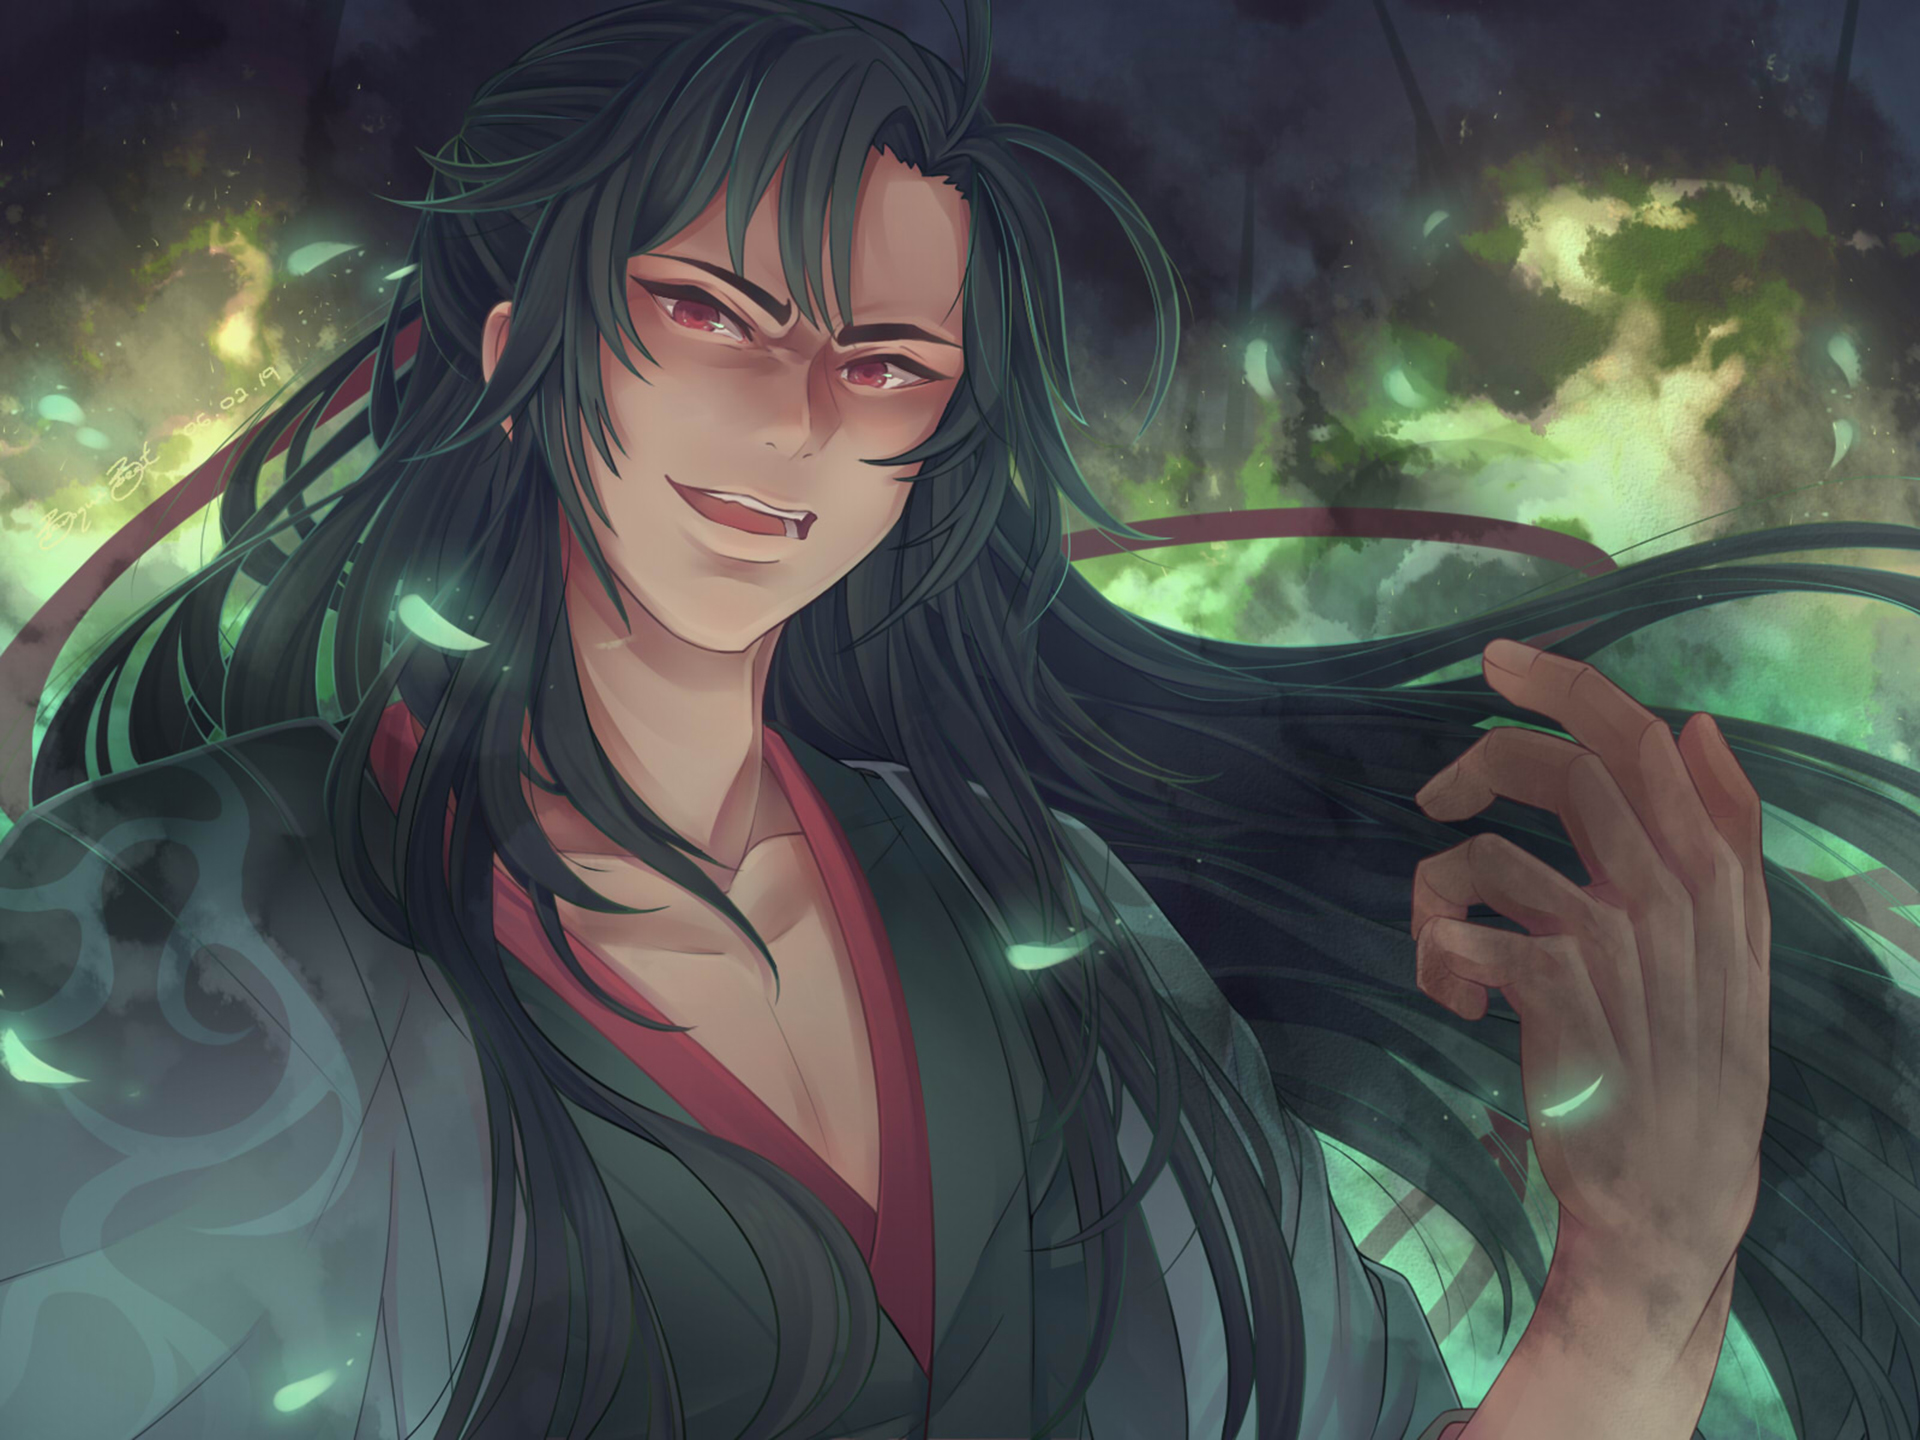 Wei Ying by baroquebeat